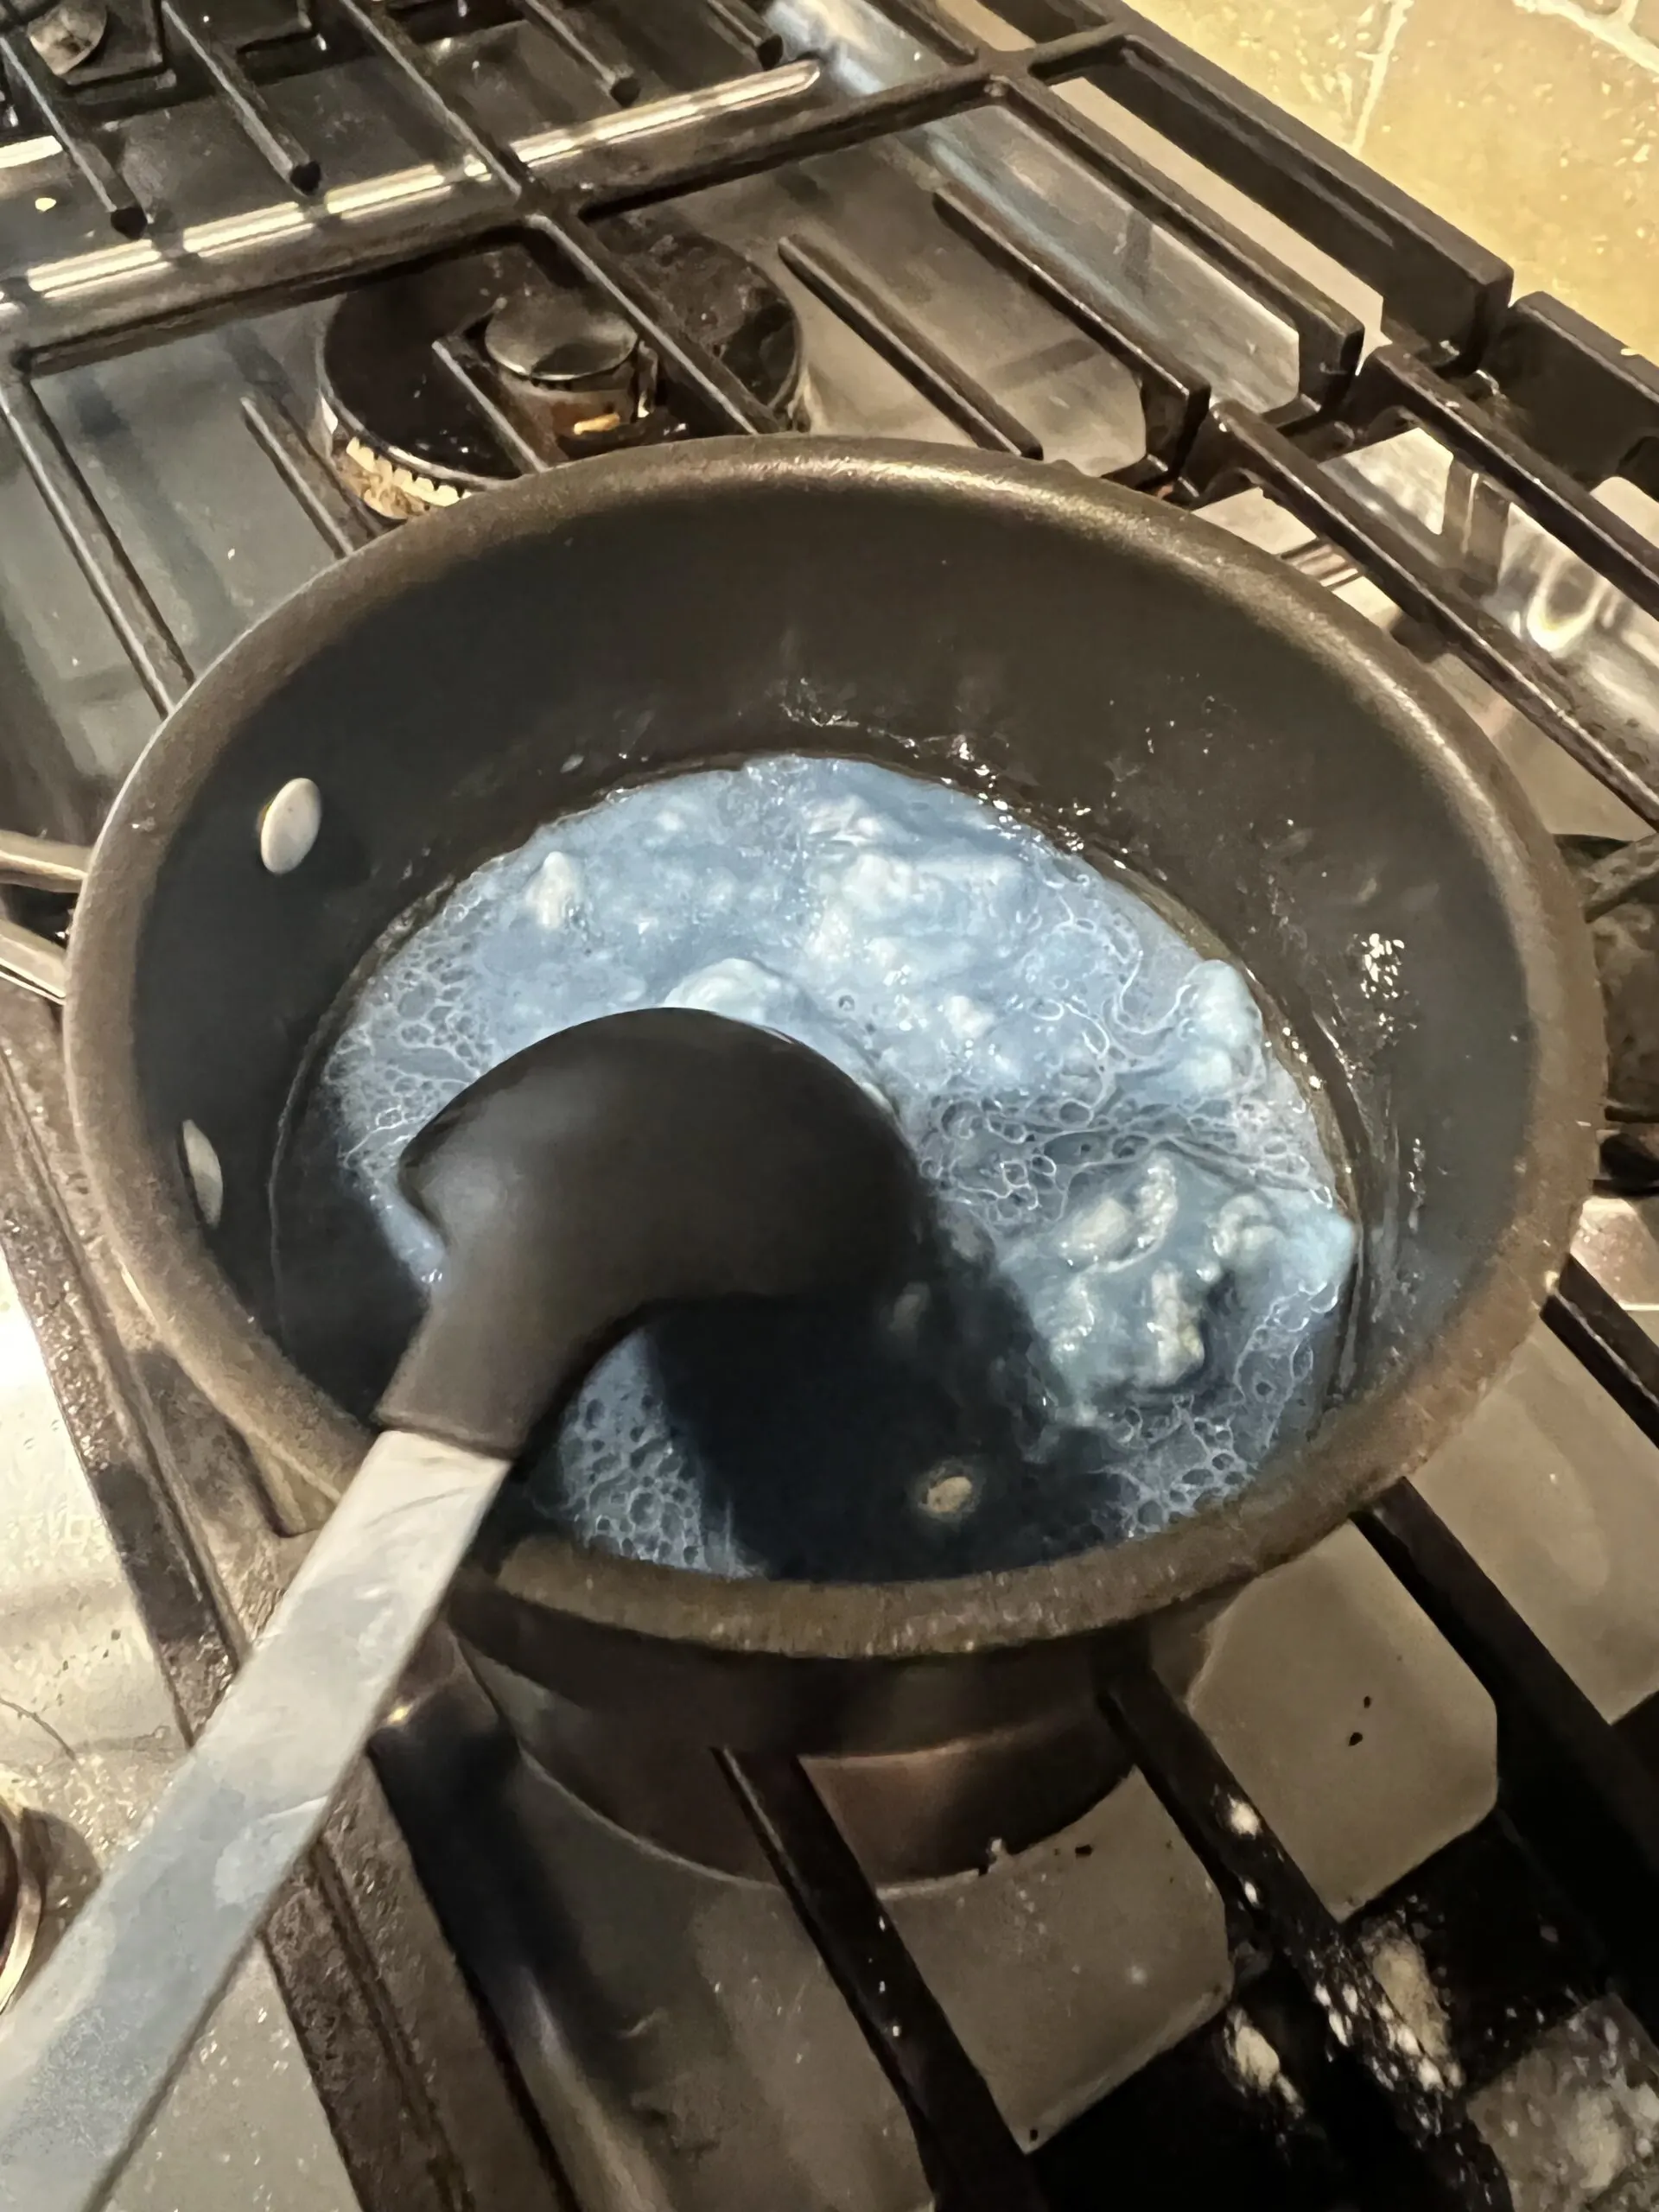 mixing play dough on the stove